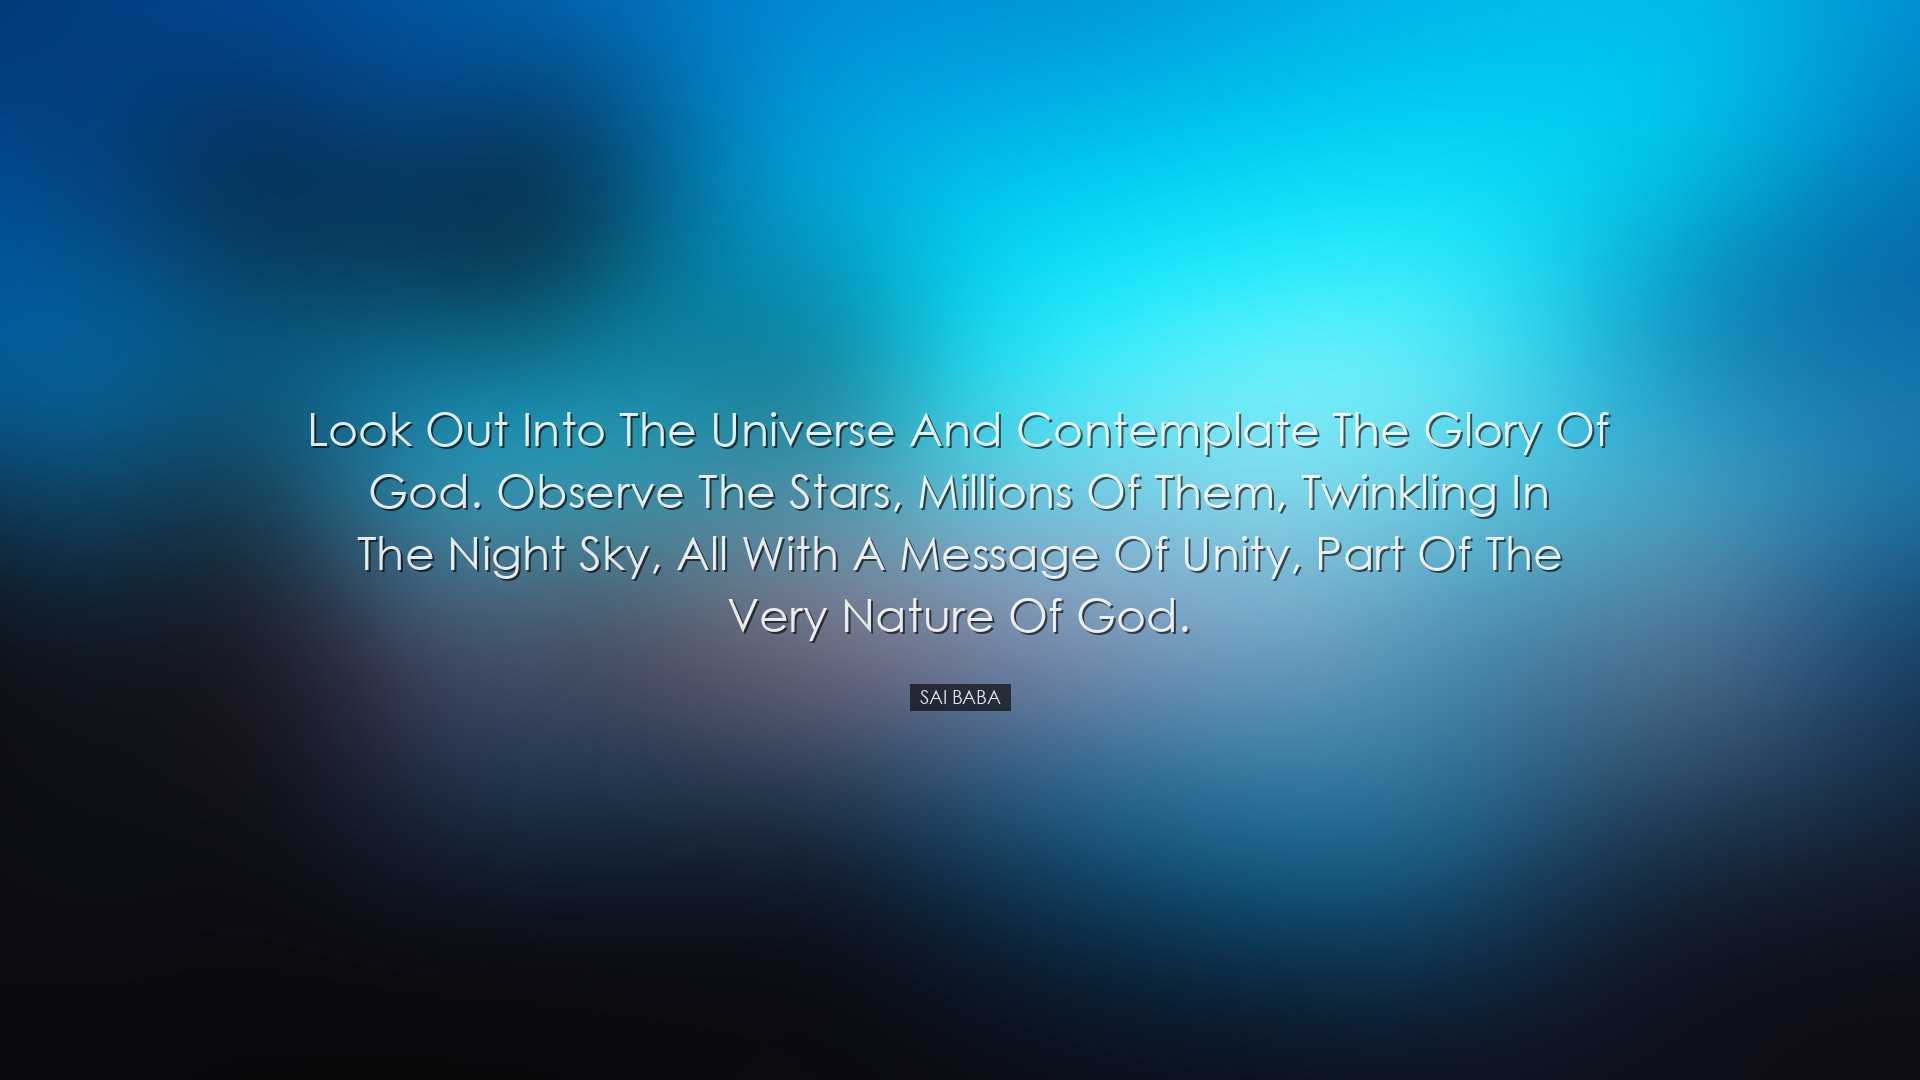 Look out into the universe and contemplate the glory of God. Obser